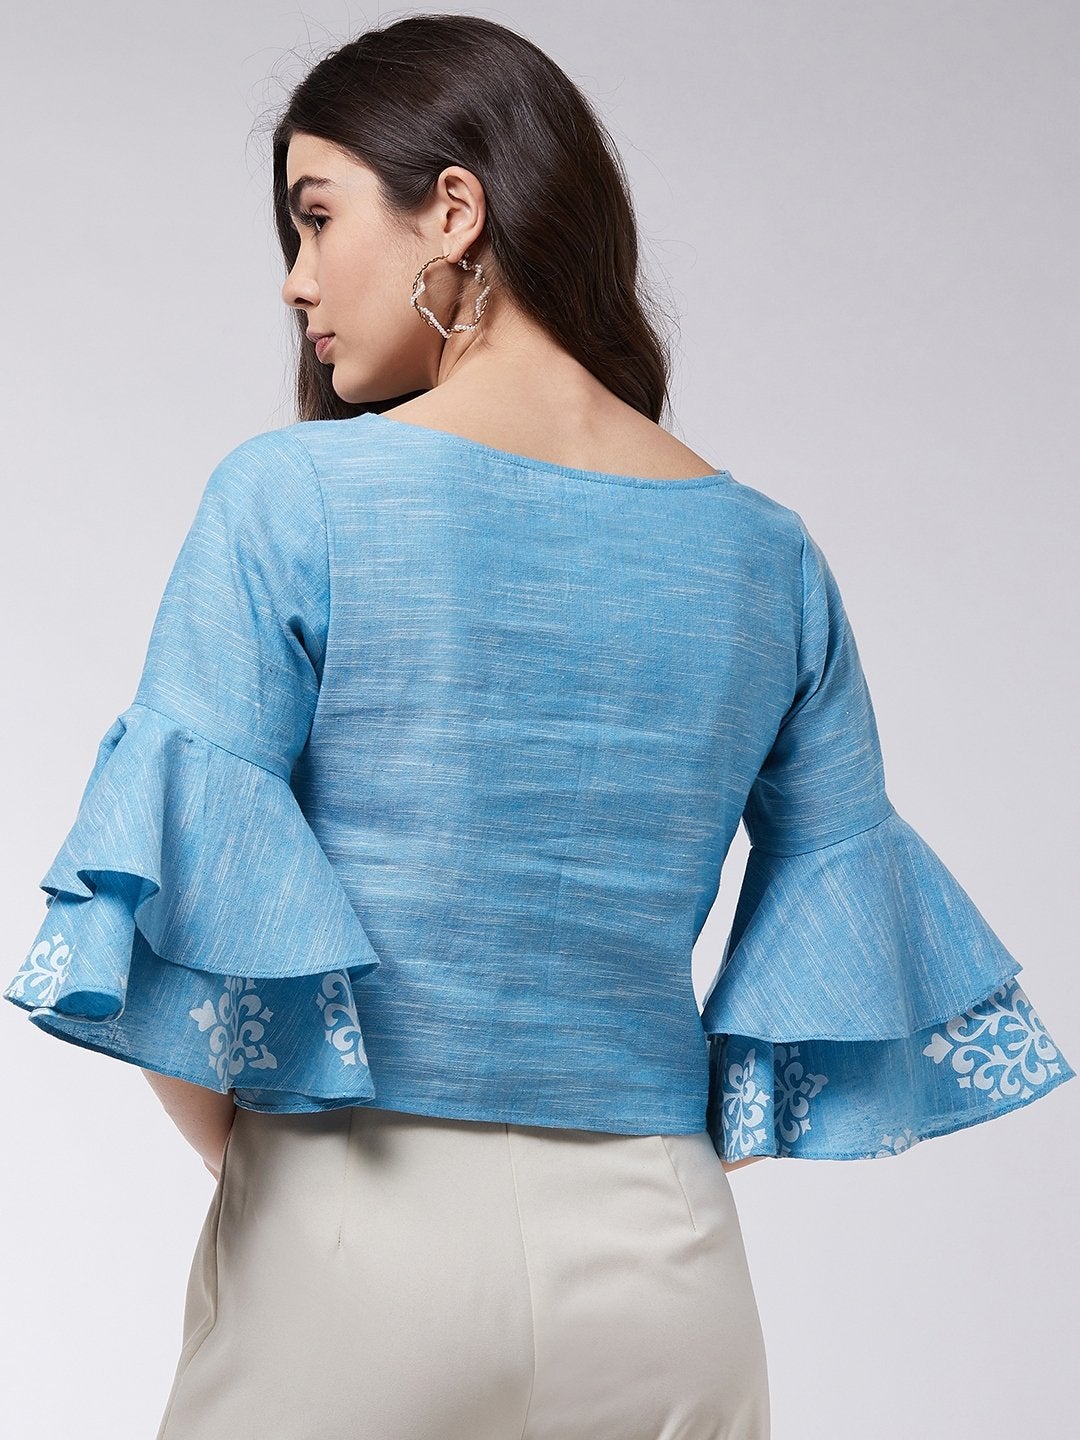 Women's Block Printed Chambray Top With Bell Sleeves - Pannkh